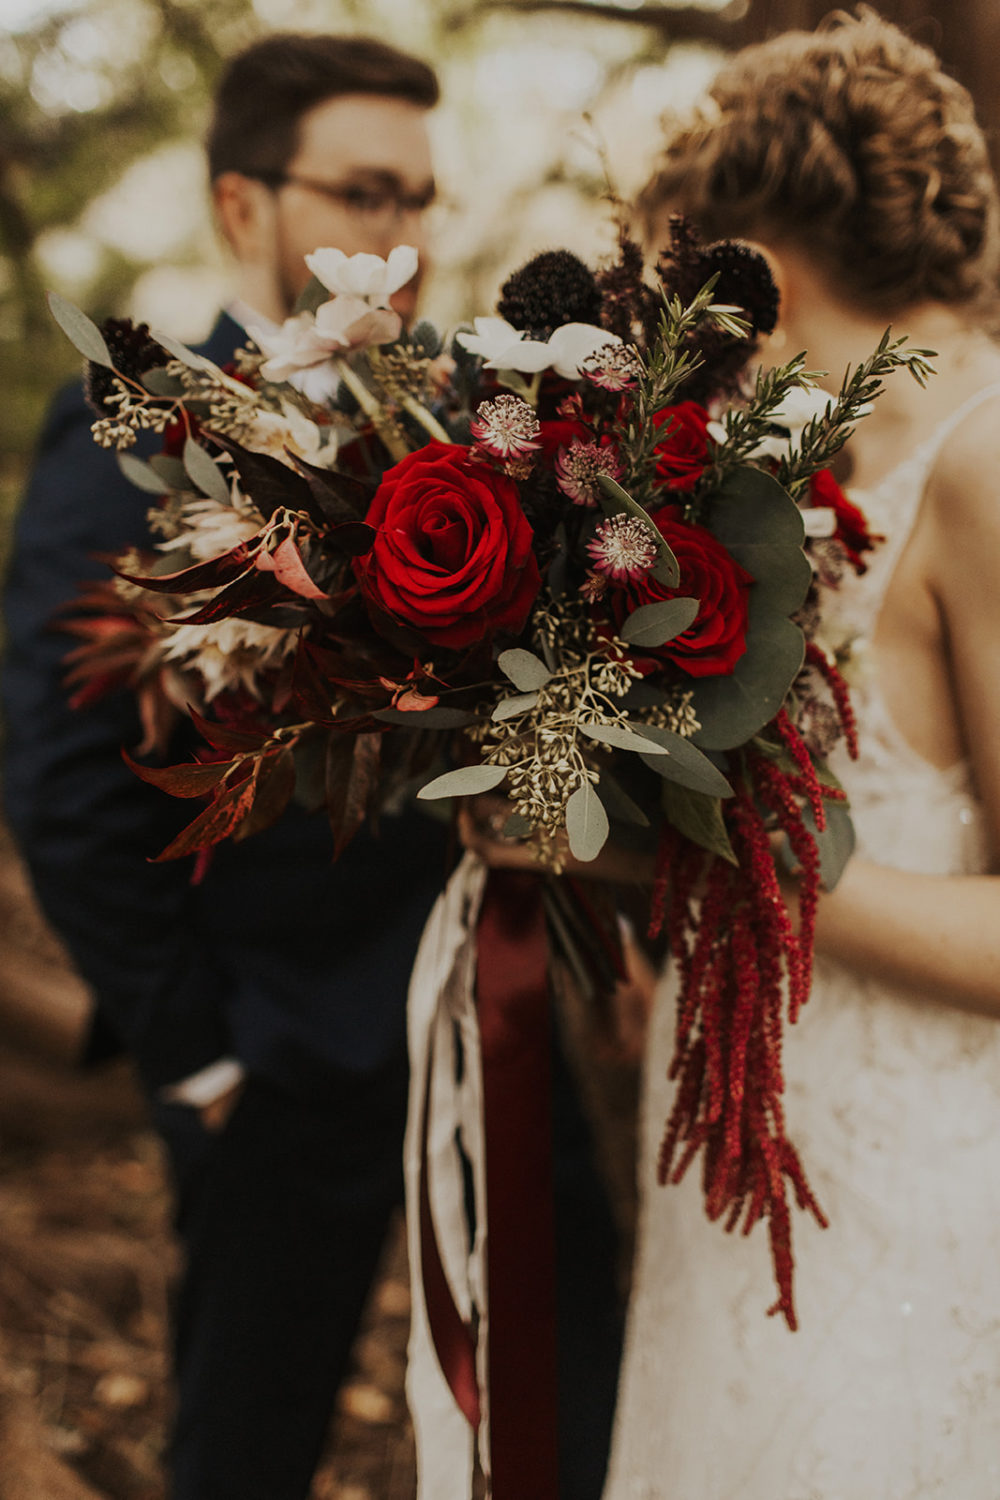 Bride holds red rose wedding bouquet at first look in woods